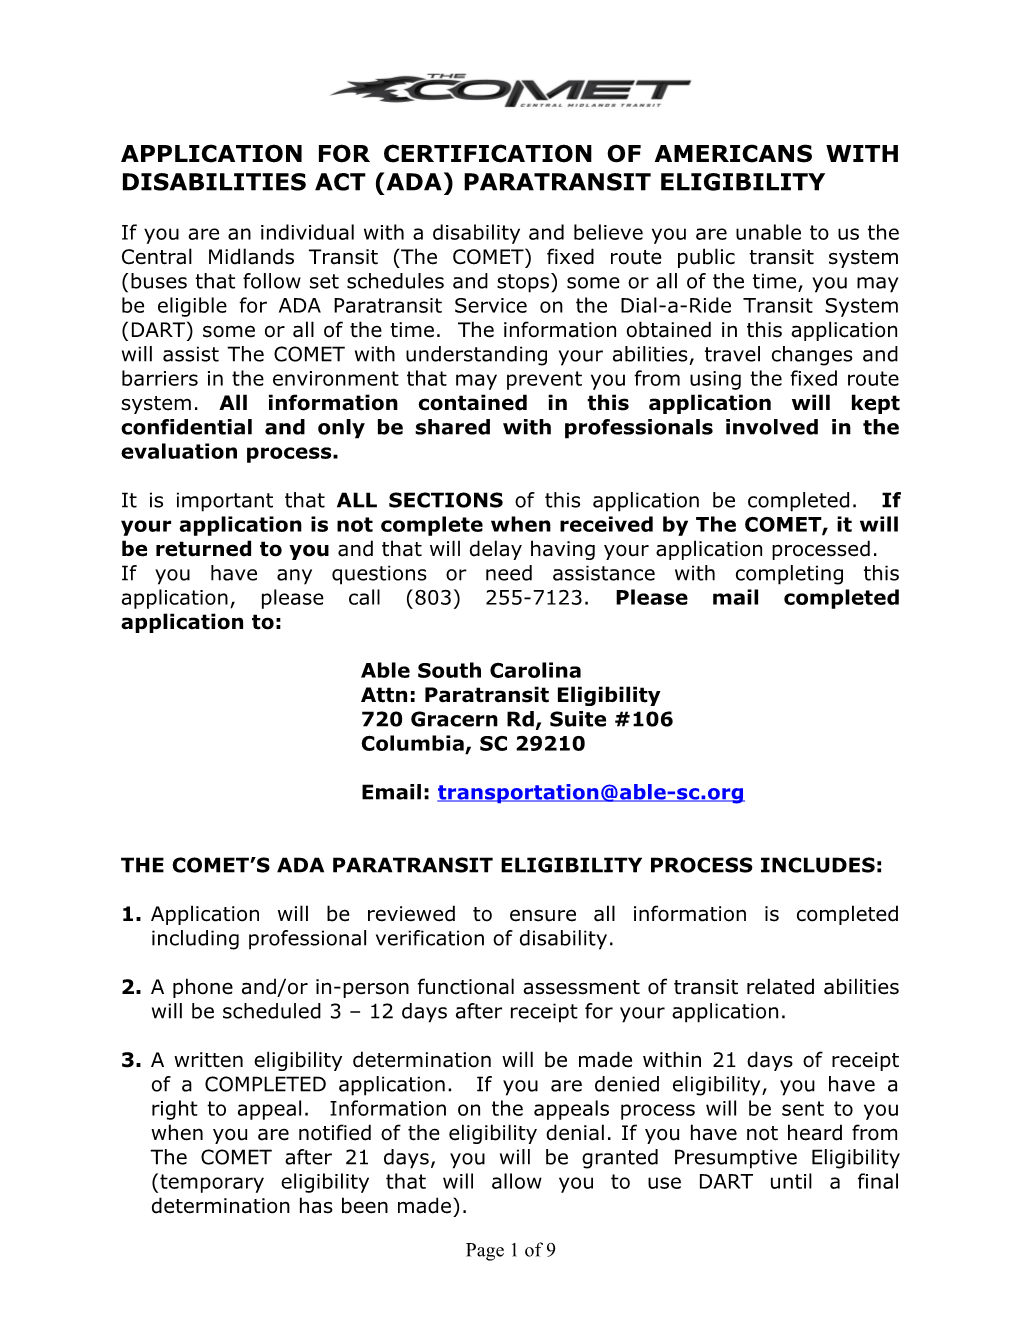 Application for Certification of Americans with Disabilities Act (Ada) Paratransit Eligibility